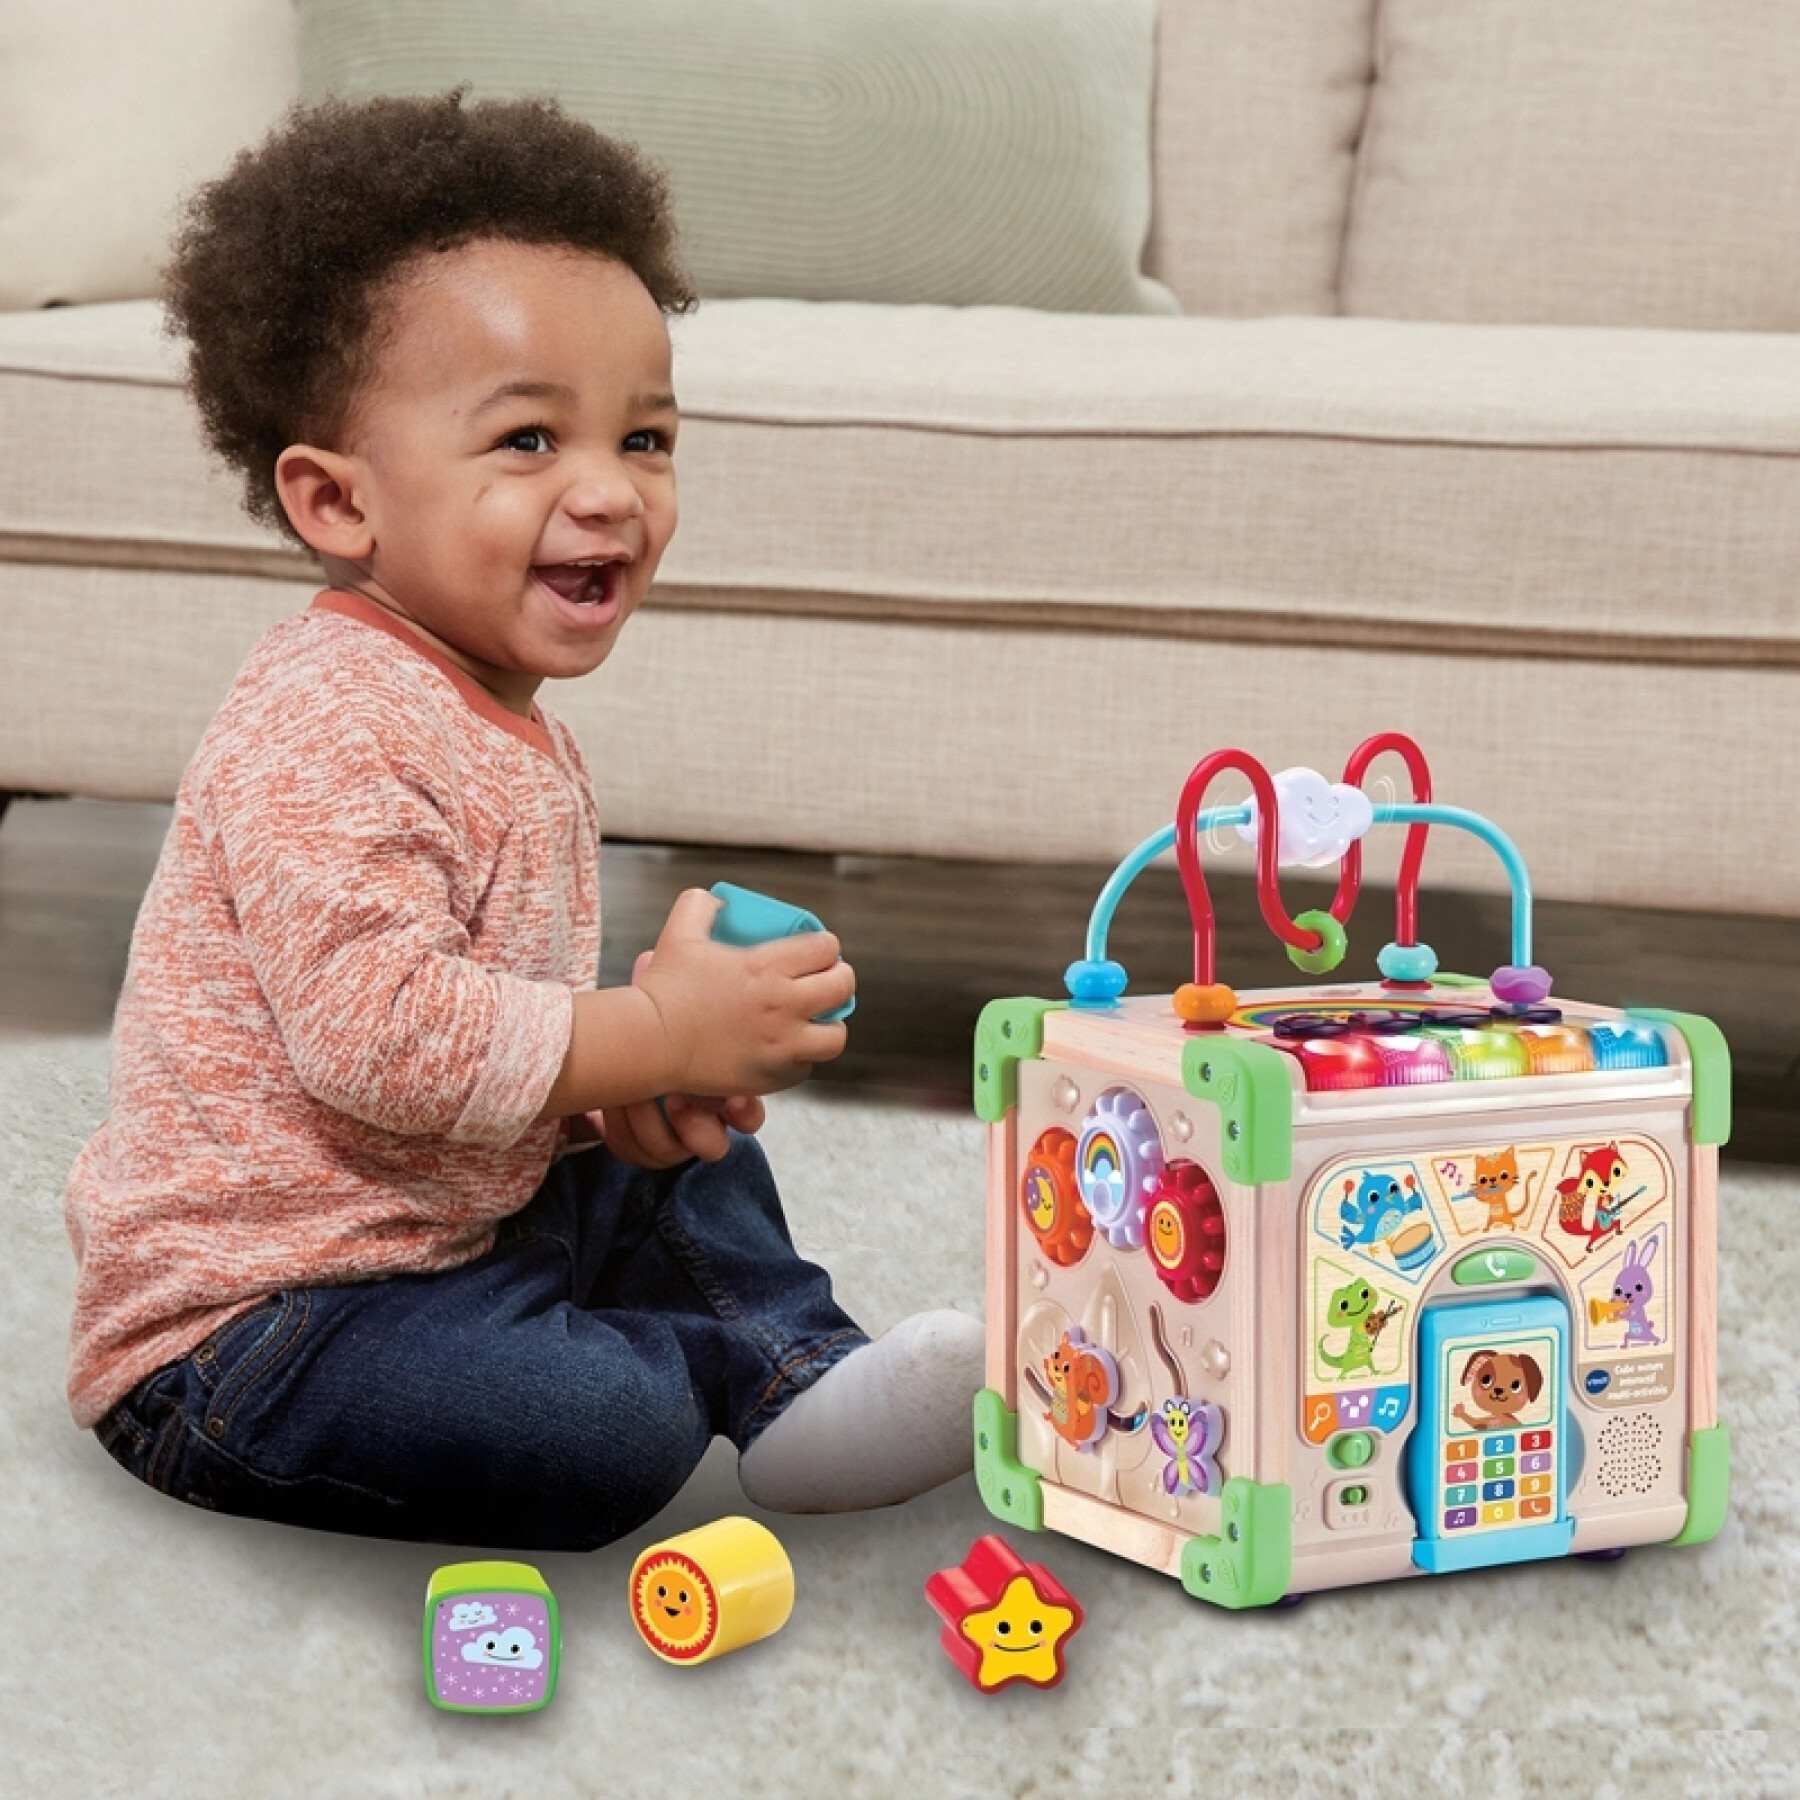 Cube indoor play set Vtech Electronics Europe